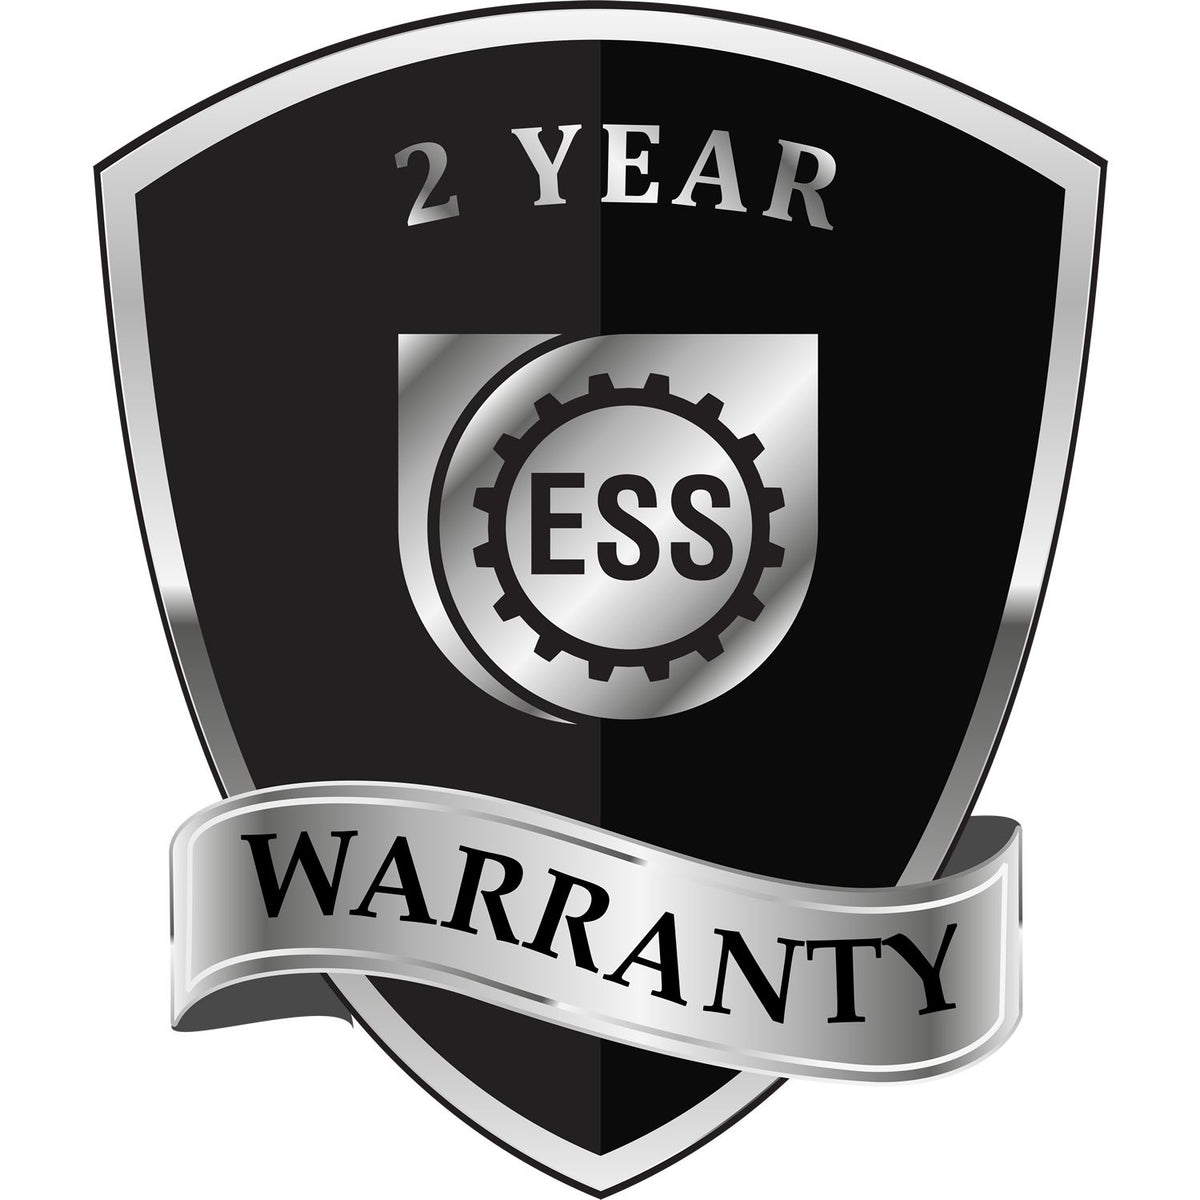 A black and silver badge or emblem showing warranty information for the Long Reach Mississippi Geology Seal